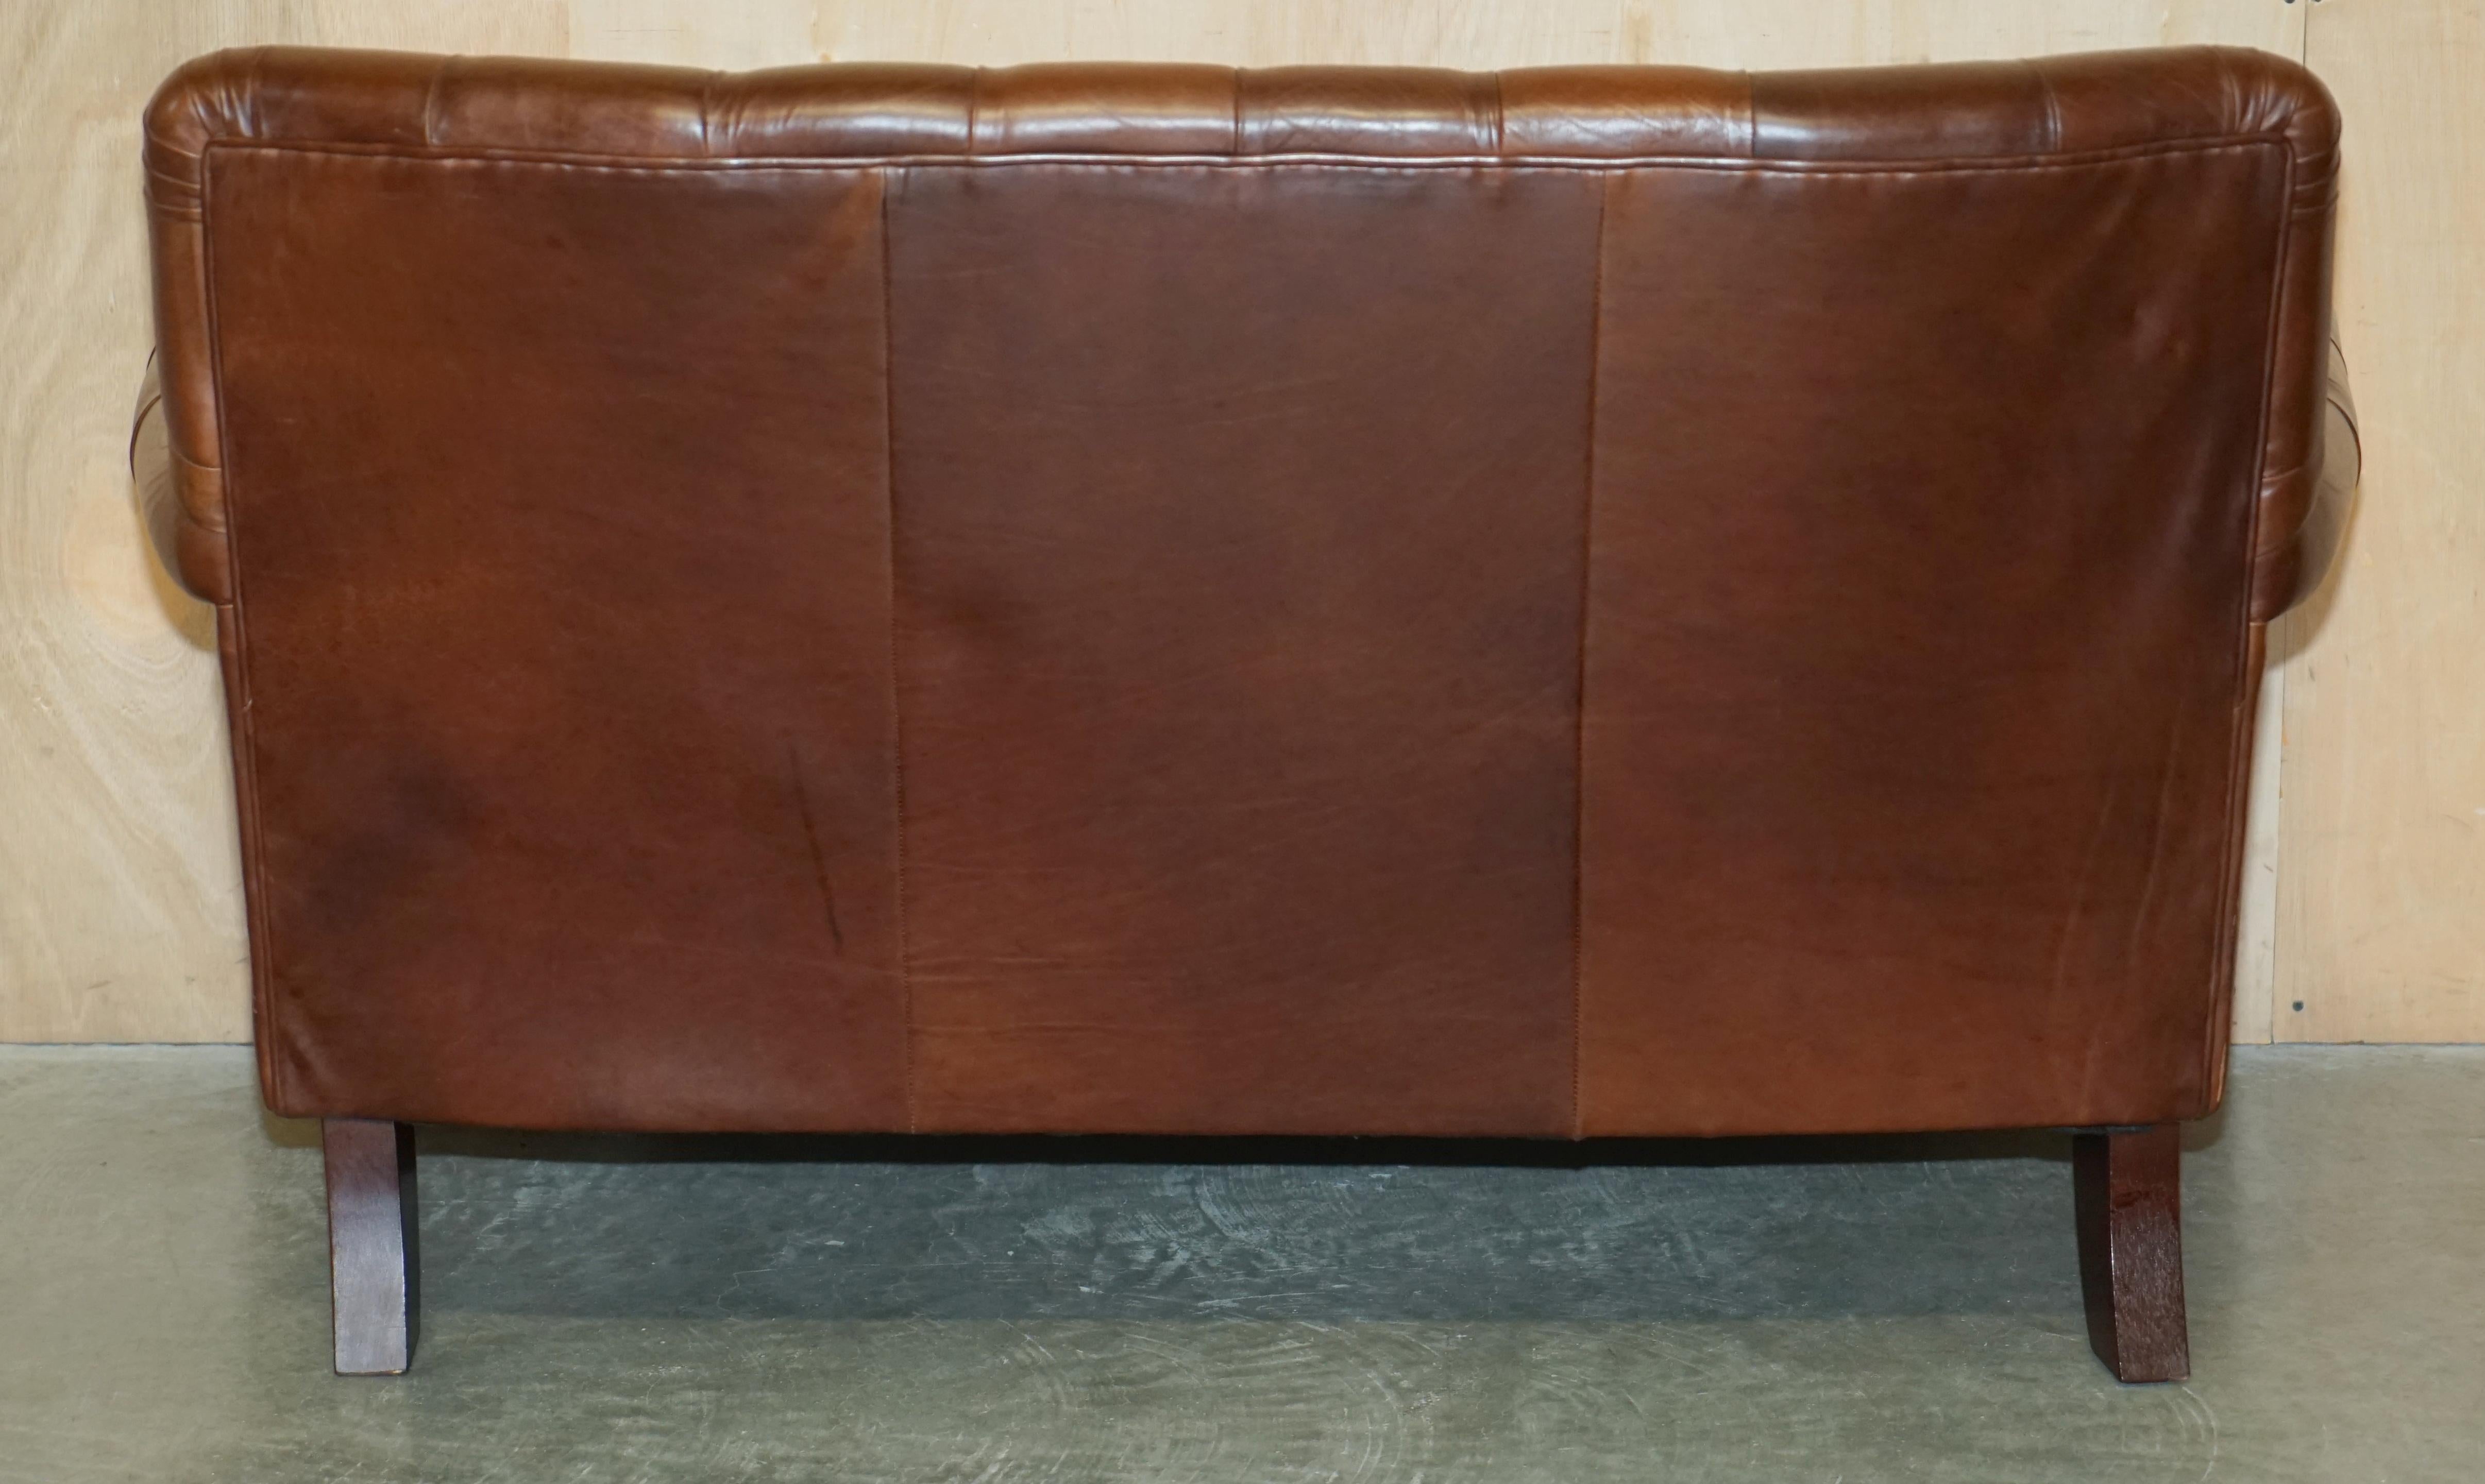 FiNE CHESTNUT BROWN LEATHER LAUREN ASHLEY CHESTERFIELD TWO SEAT LIBRARY SOFa im Angebot 11